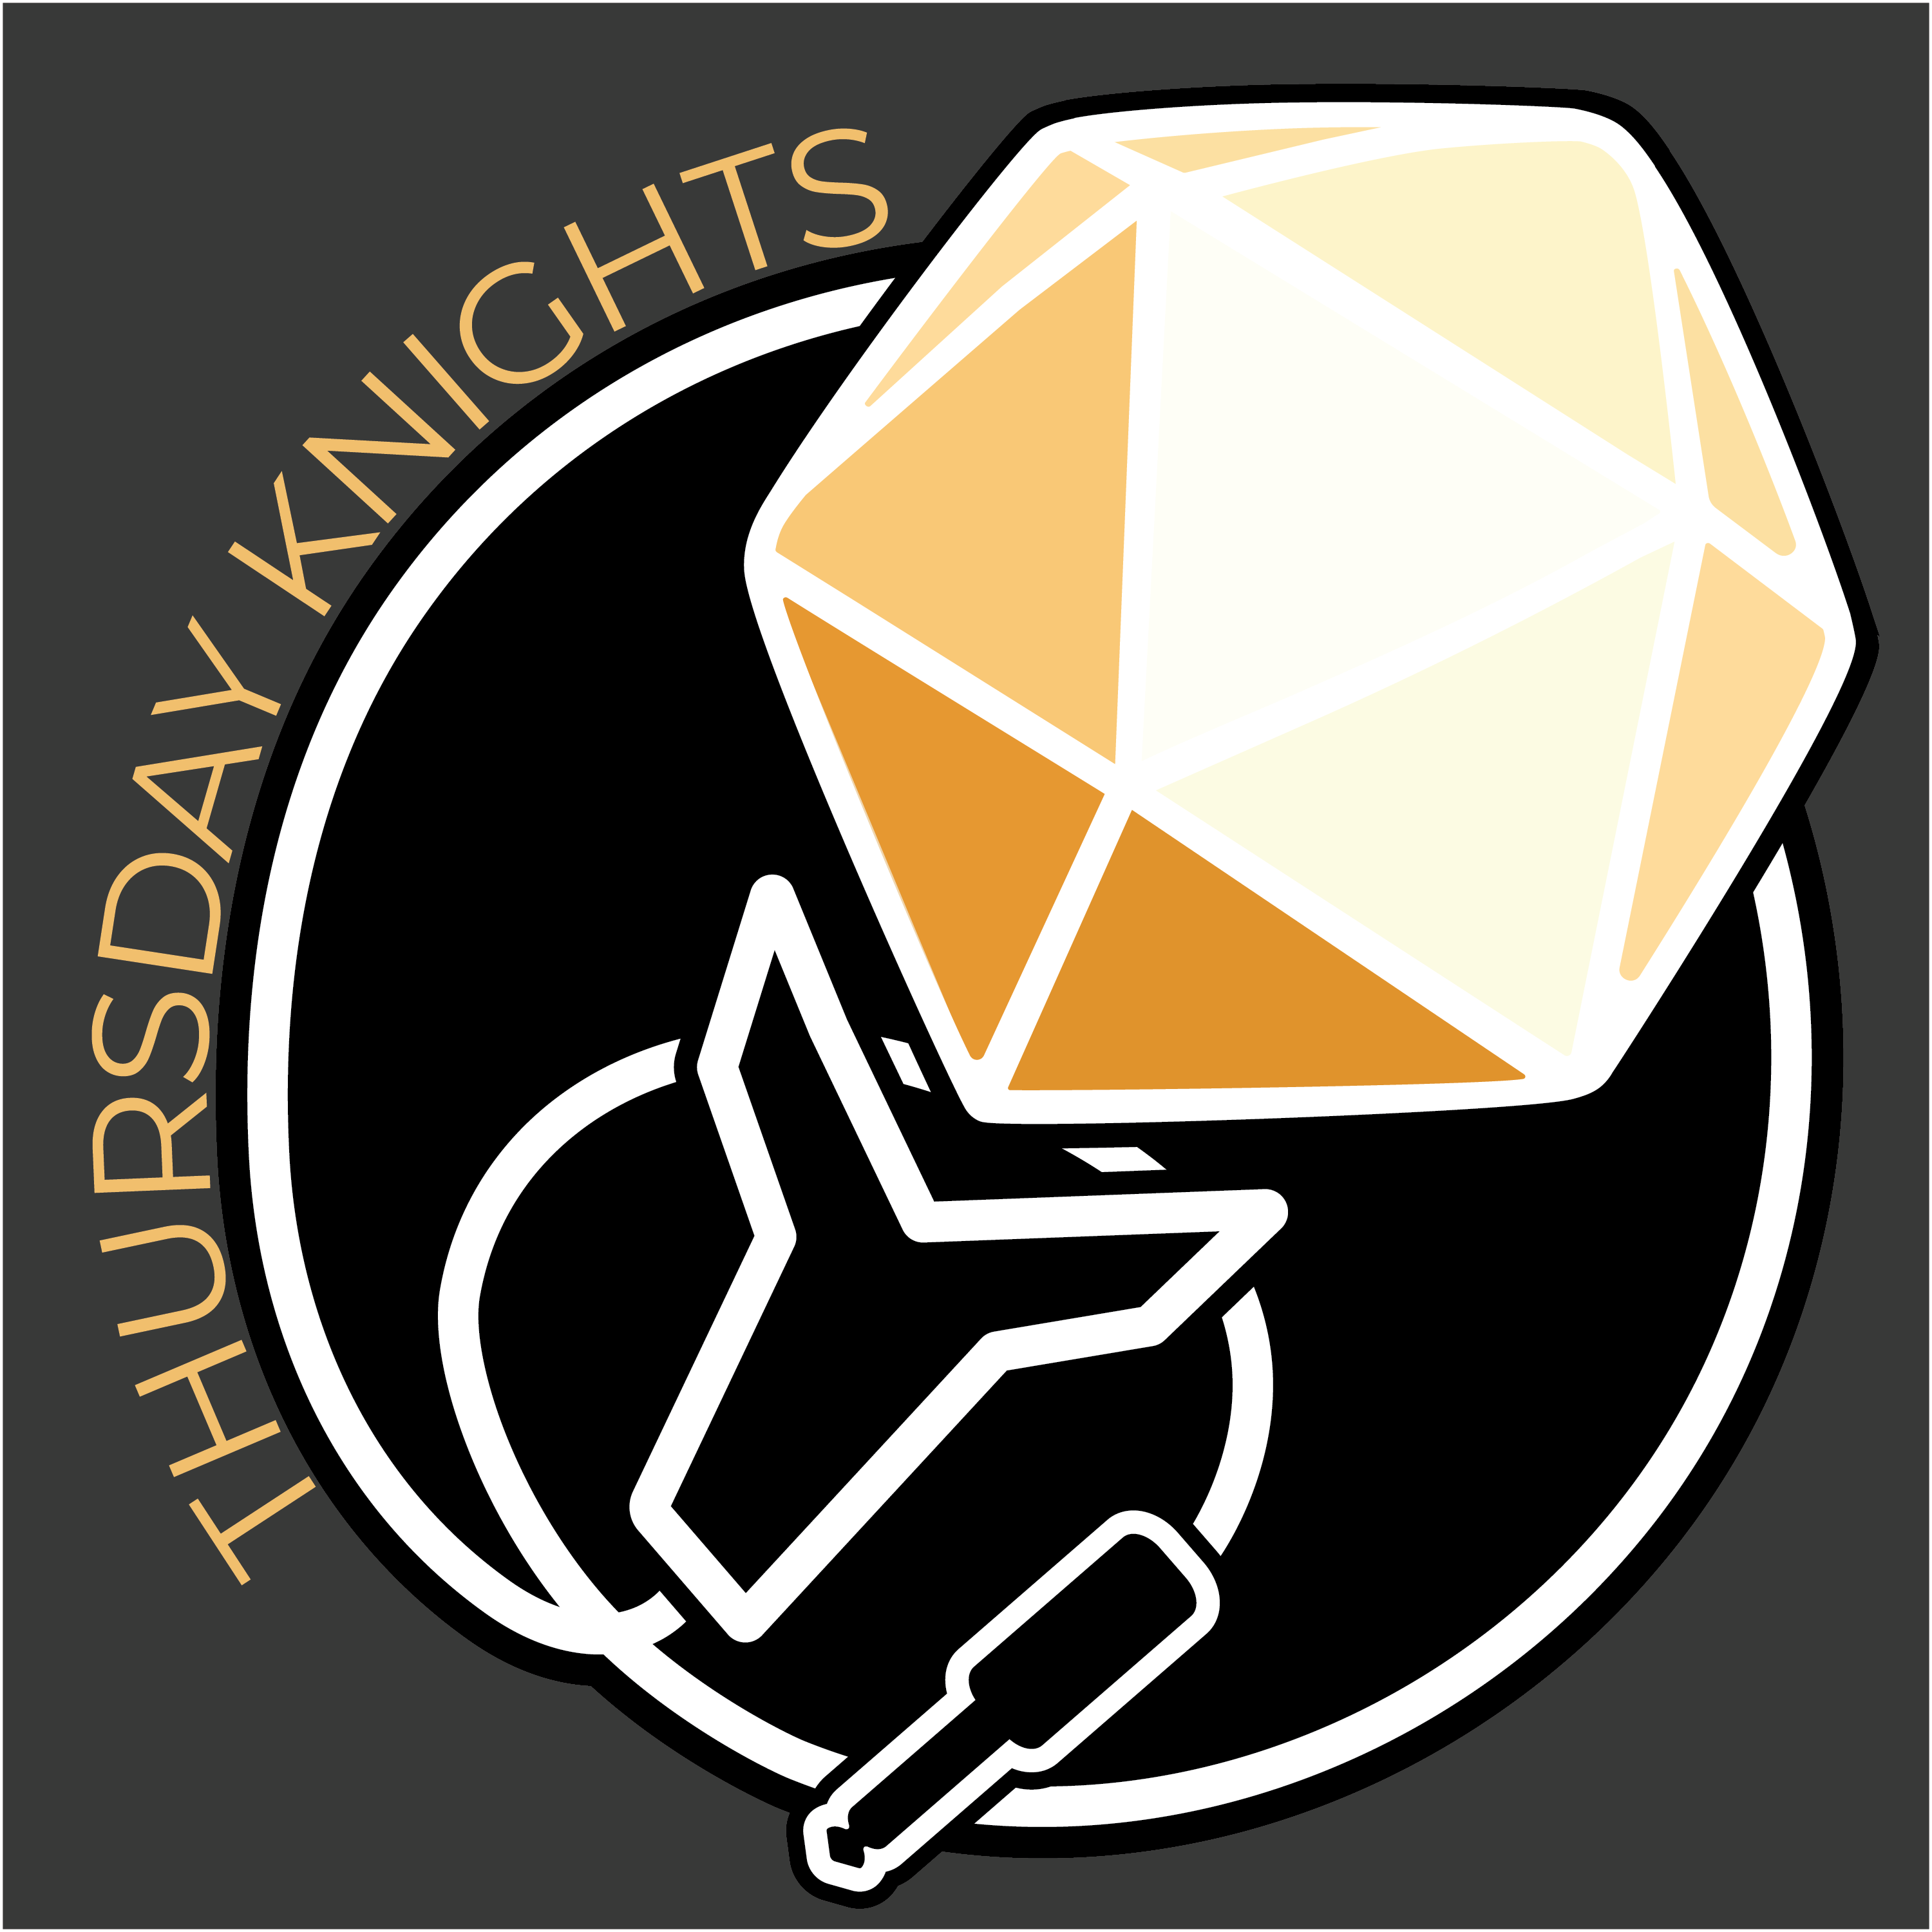 Thursday Knights Live Tabletop Roleplaying